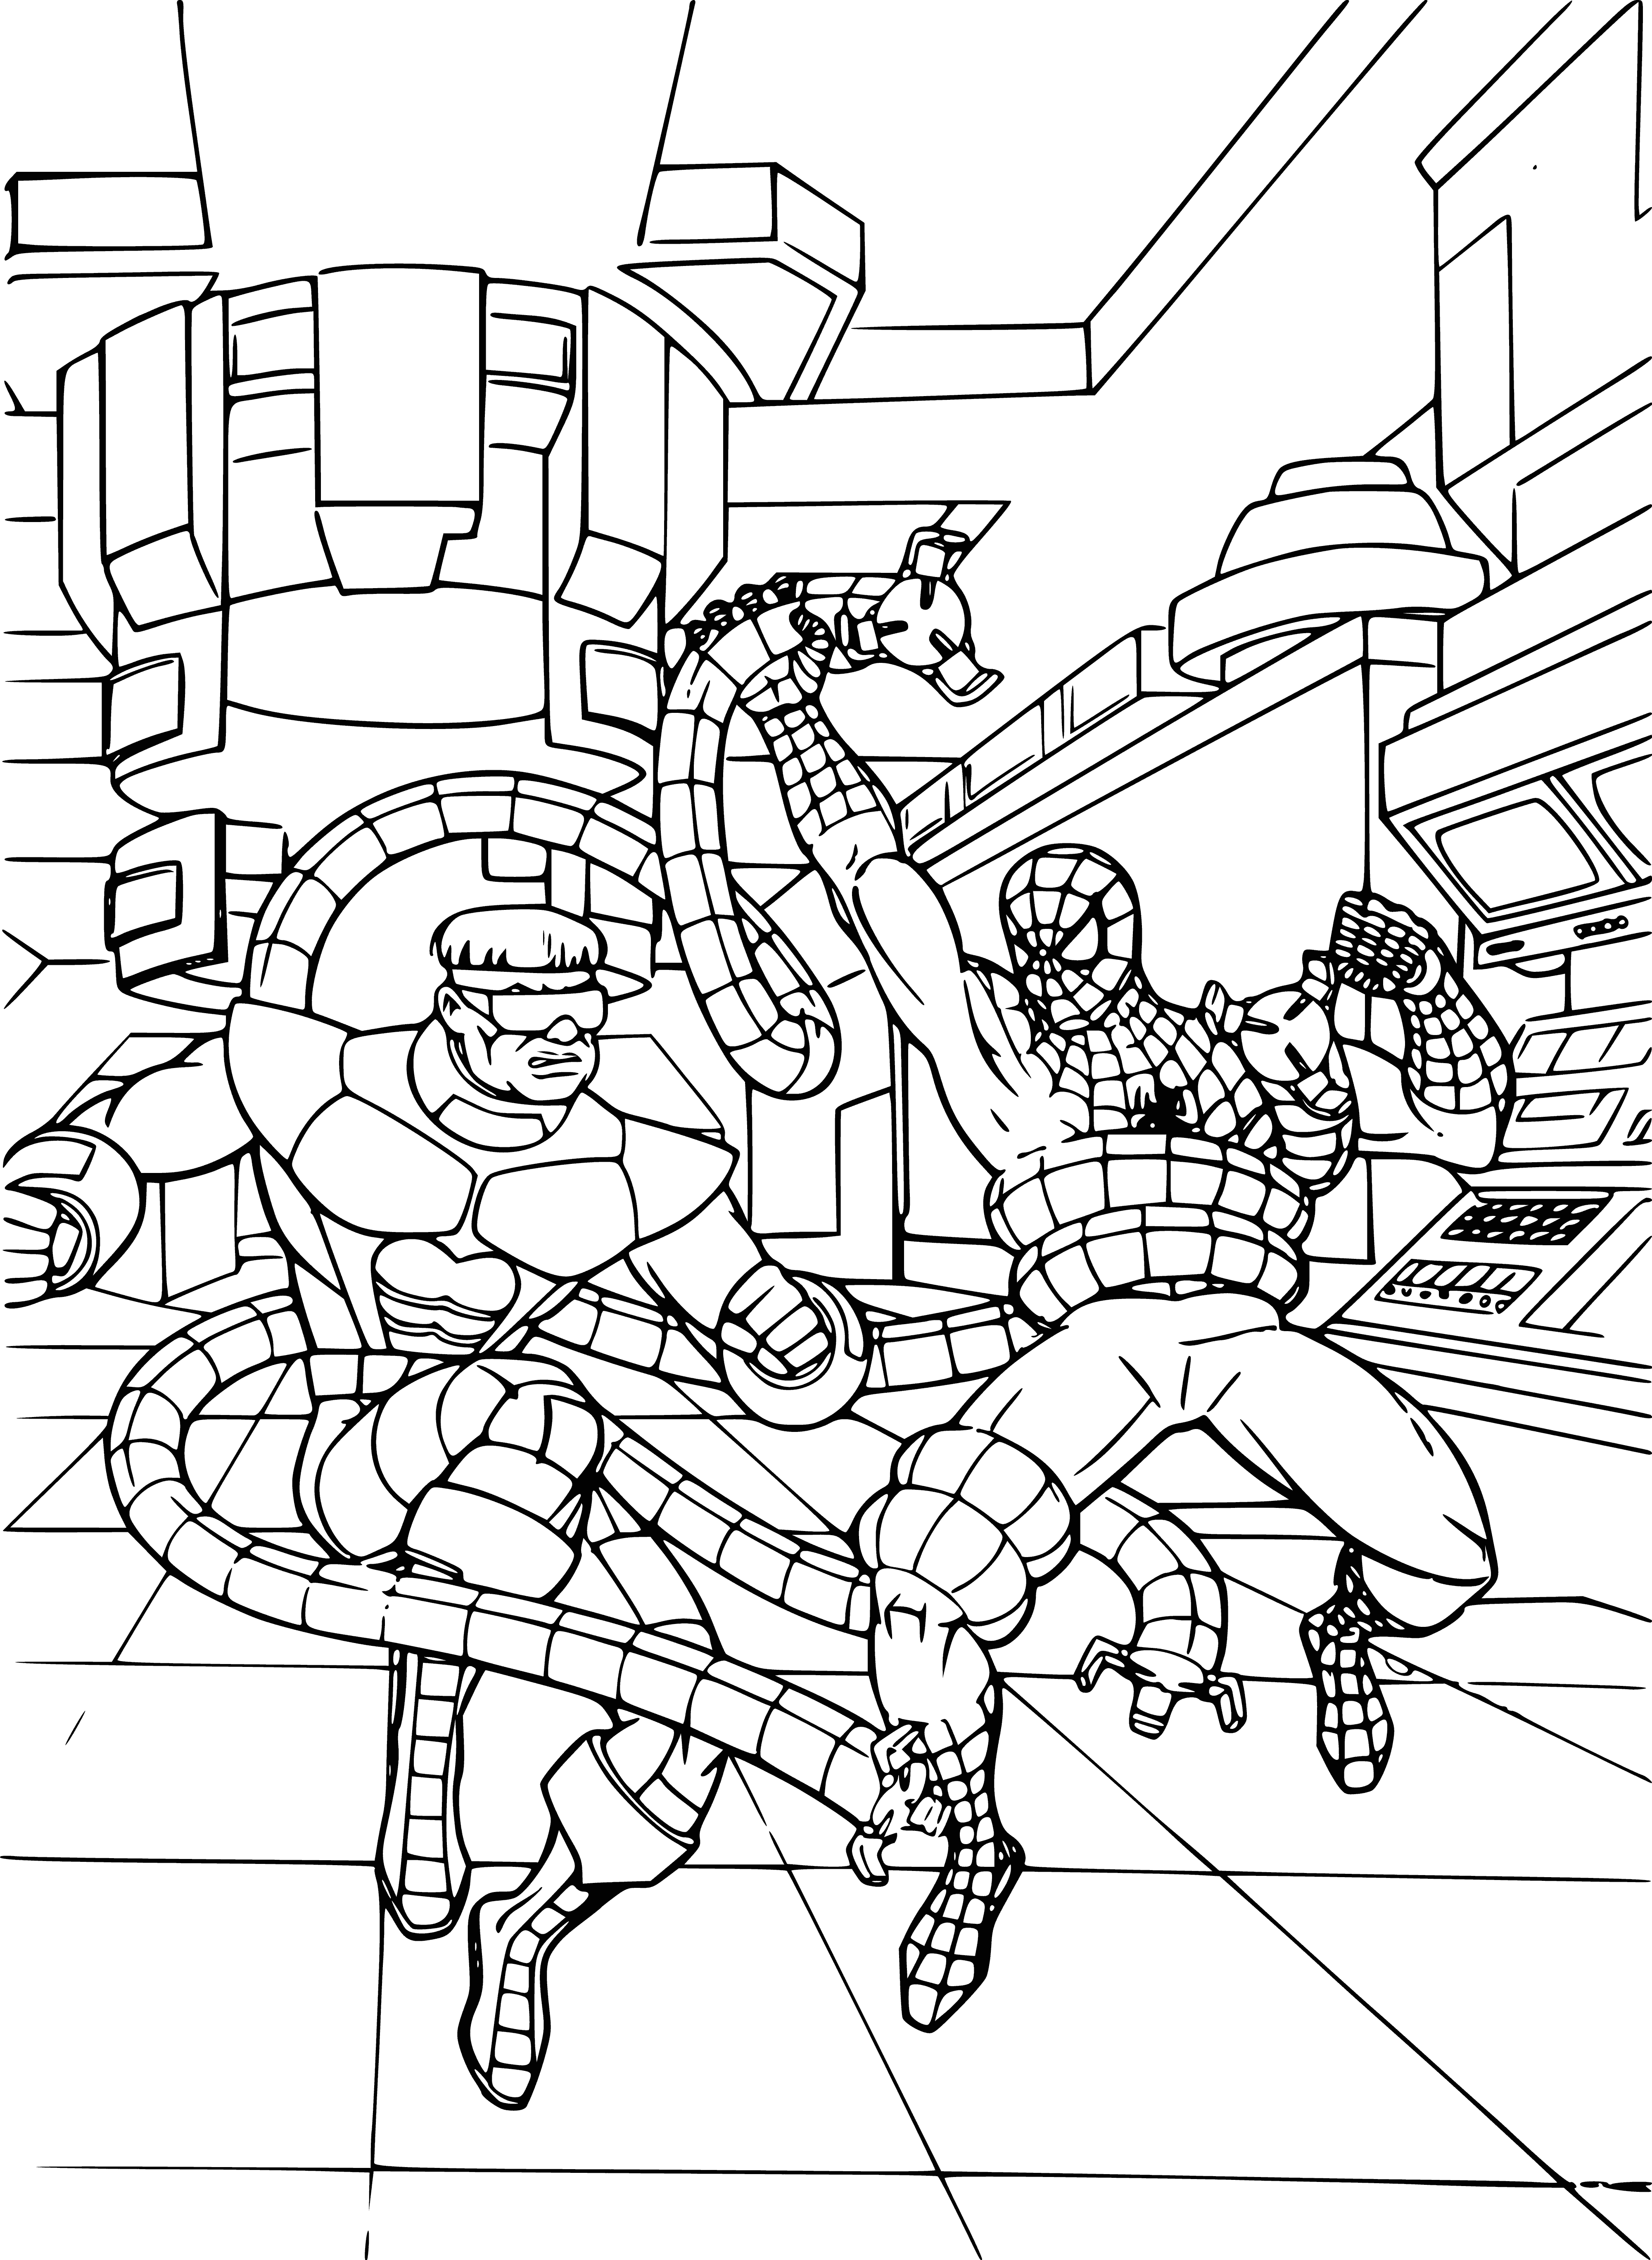 Doctor Octopus and Spider-Man coloring page